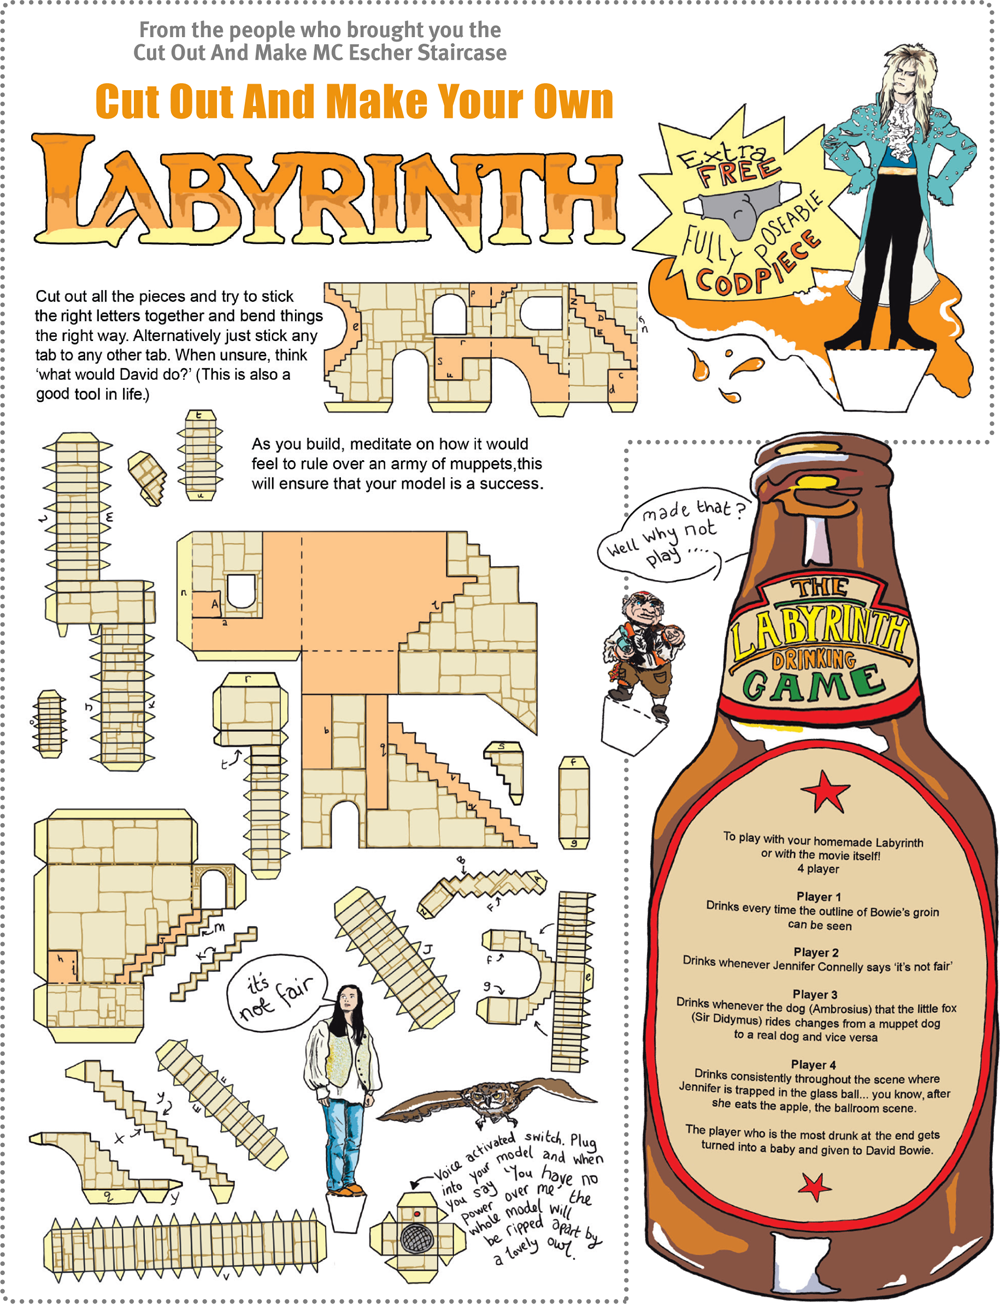 Cut Out and Make Your Own Labyrinth